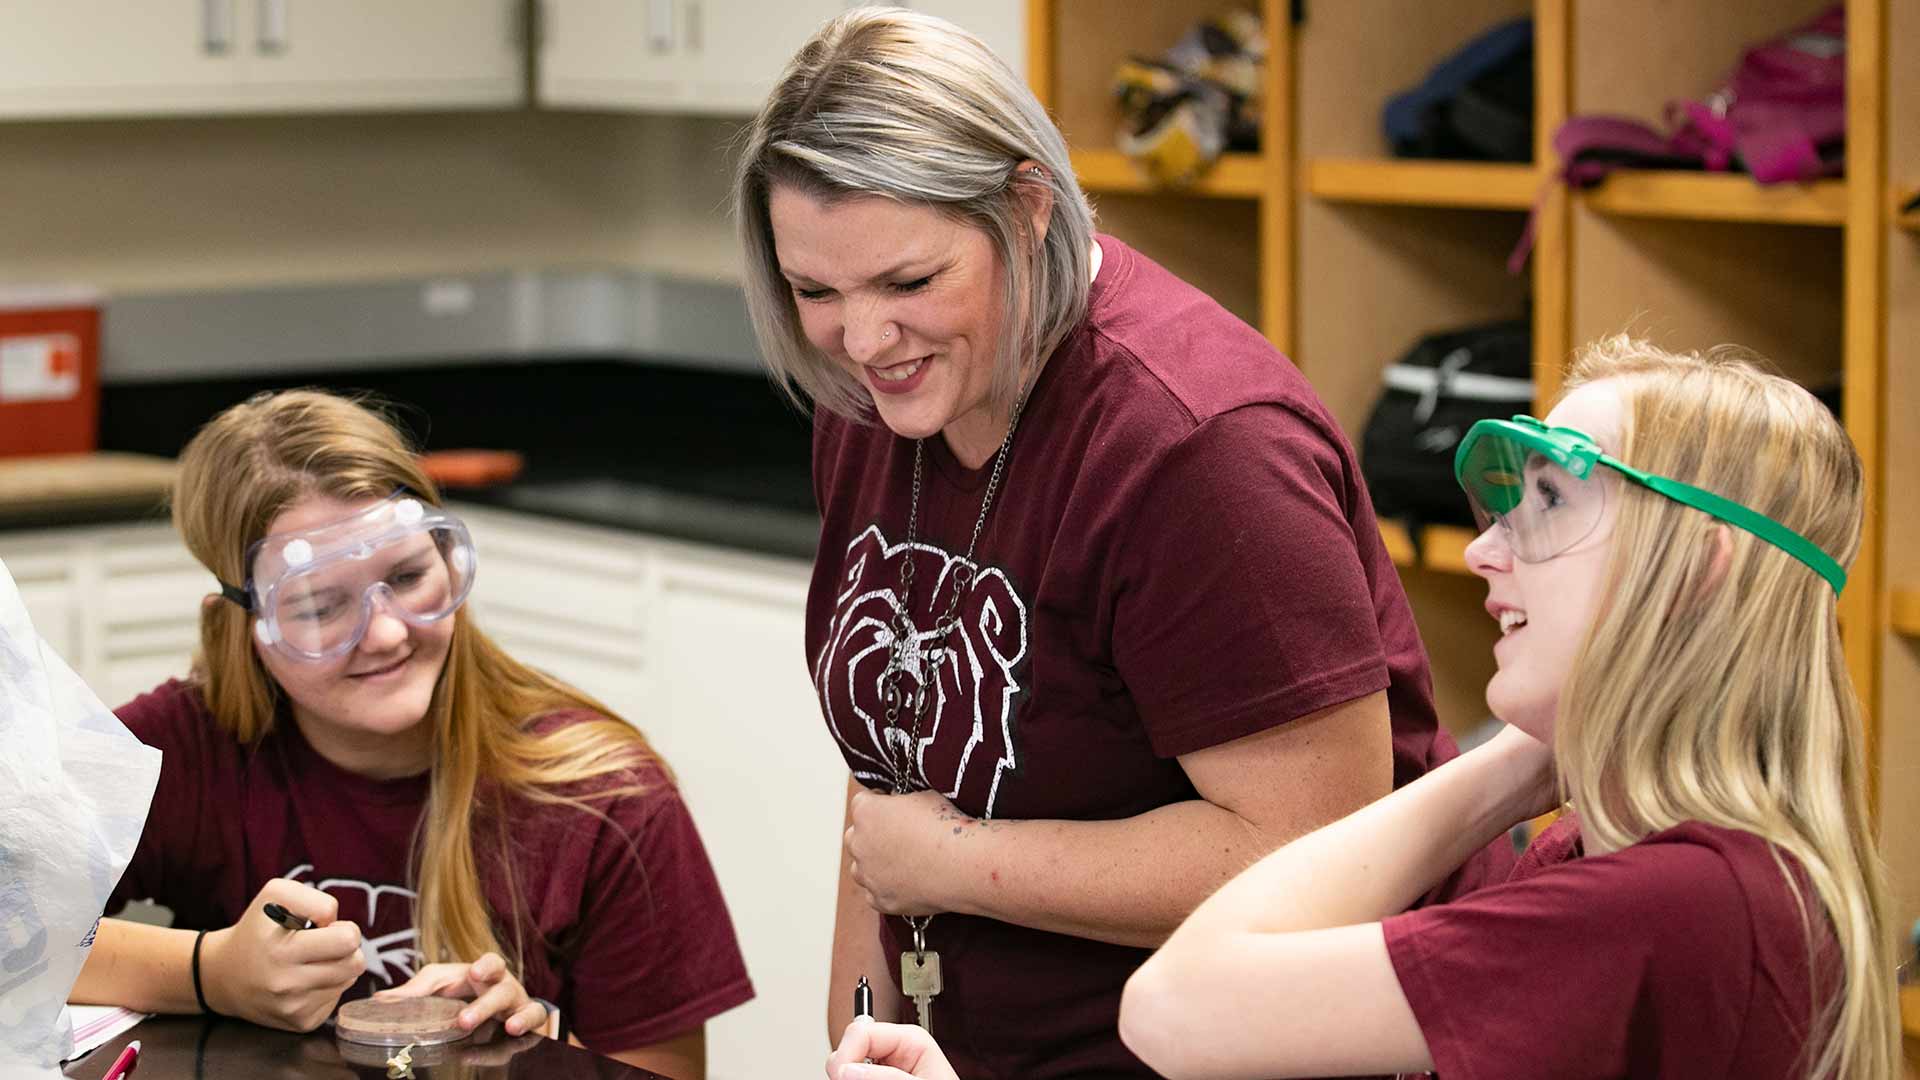 A science teacher sharing a laugh with two students during a lab class.